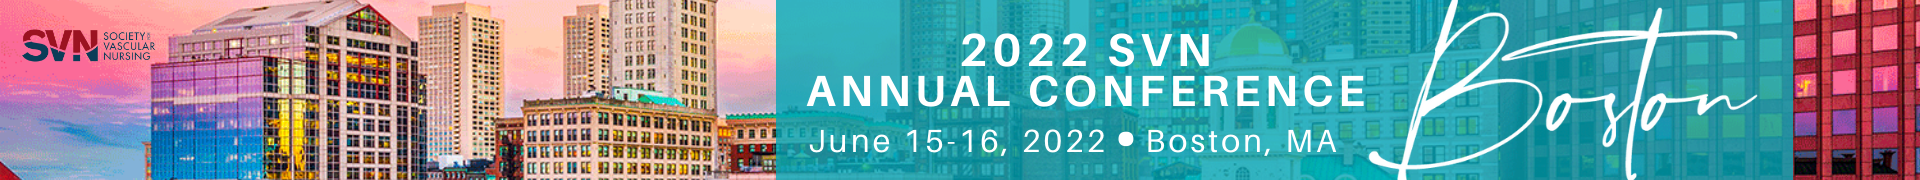 Society for Vascular Nursing 2022 Annual Conference  Event Banner